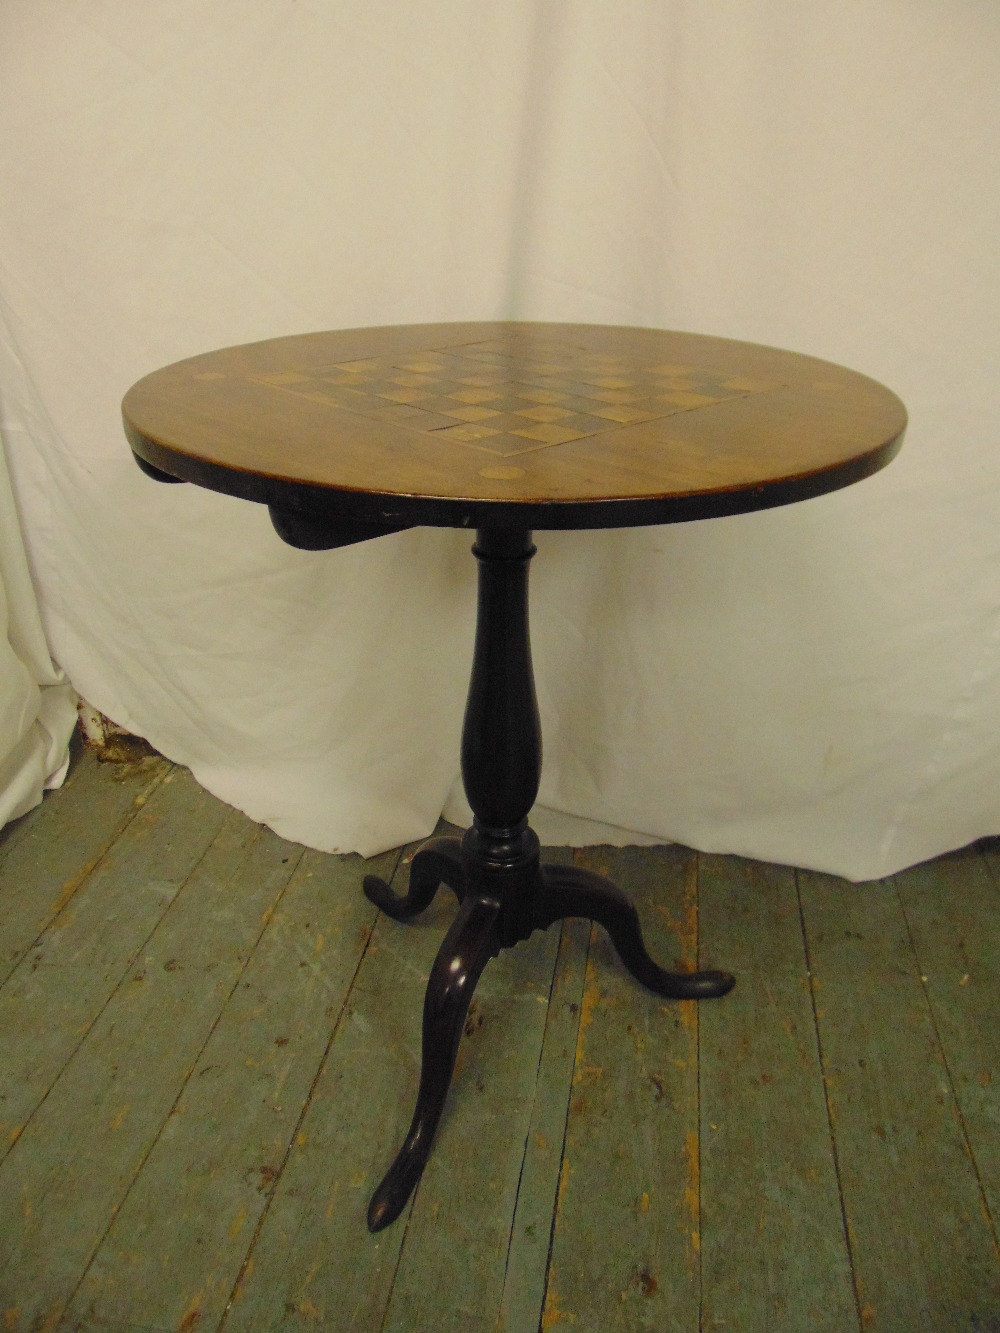 Late 19th/early 20th century tilt top table, inset with a chess board on three outswept legs - Image 2 of 2